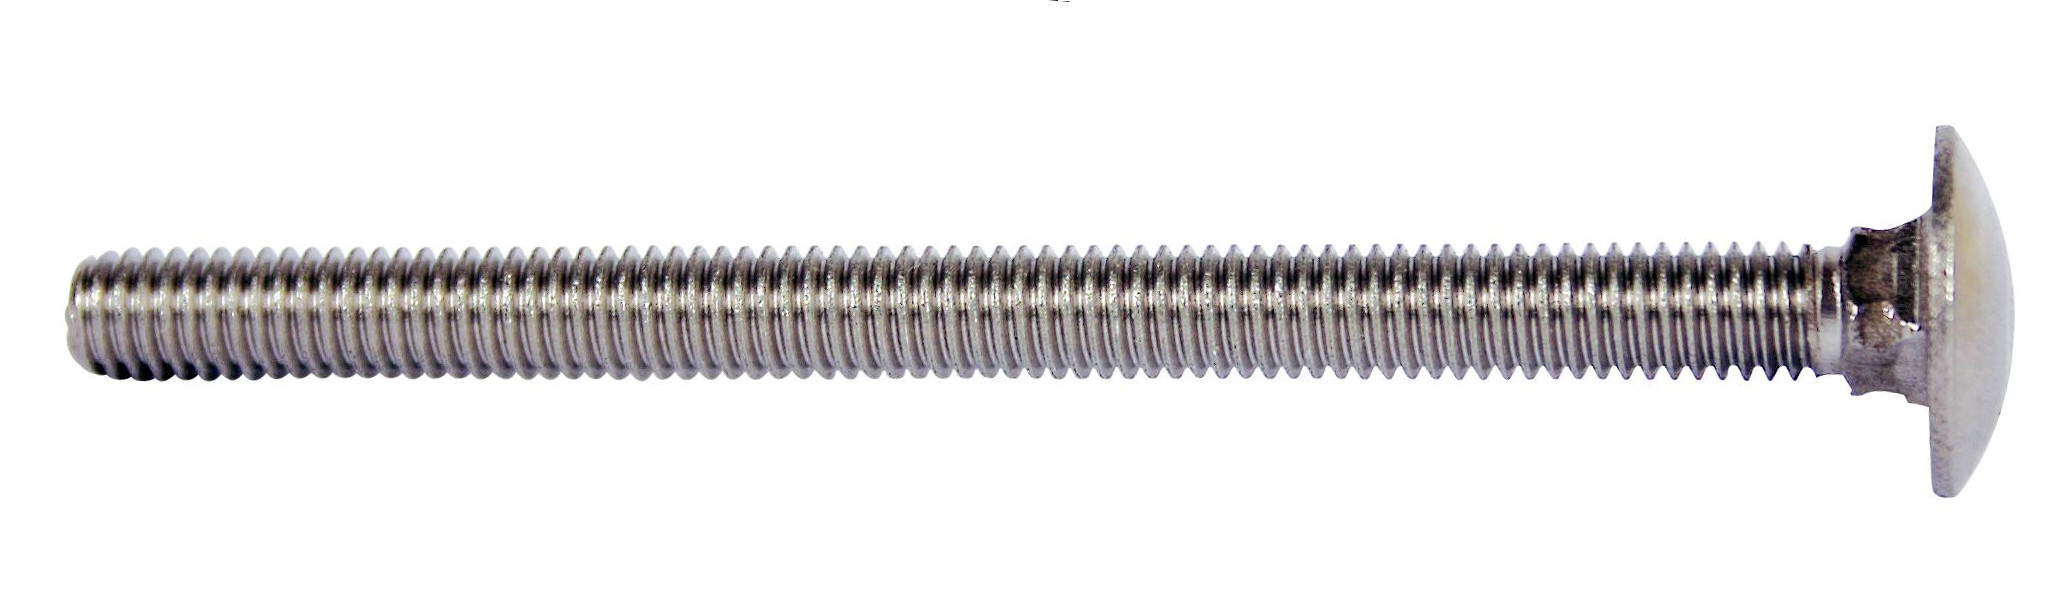 A2 Stainless Steel Cup Square Bolts